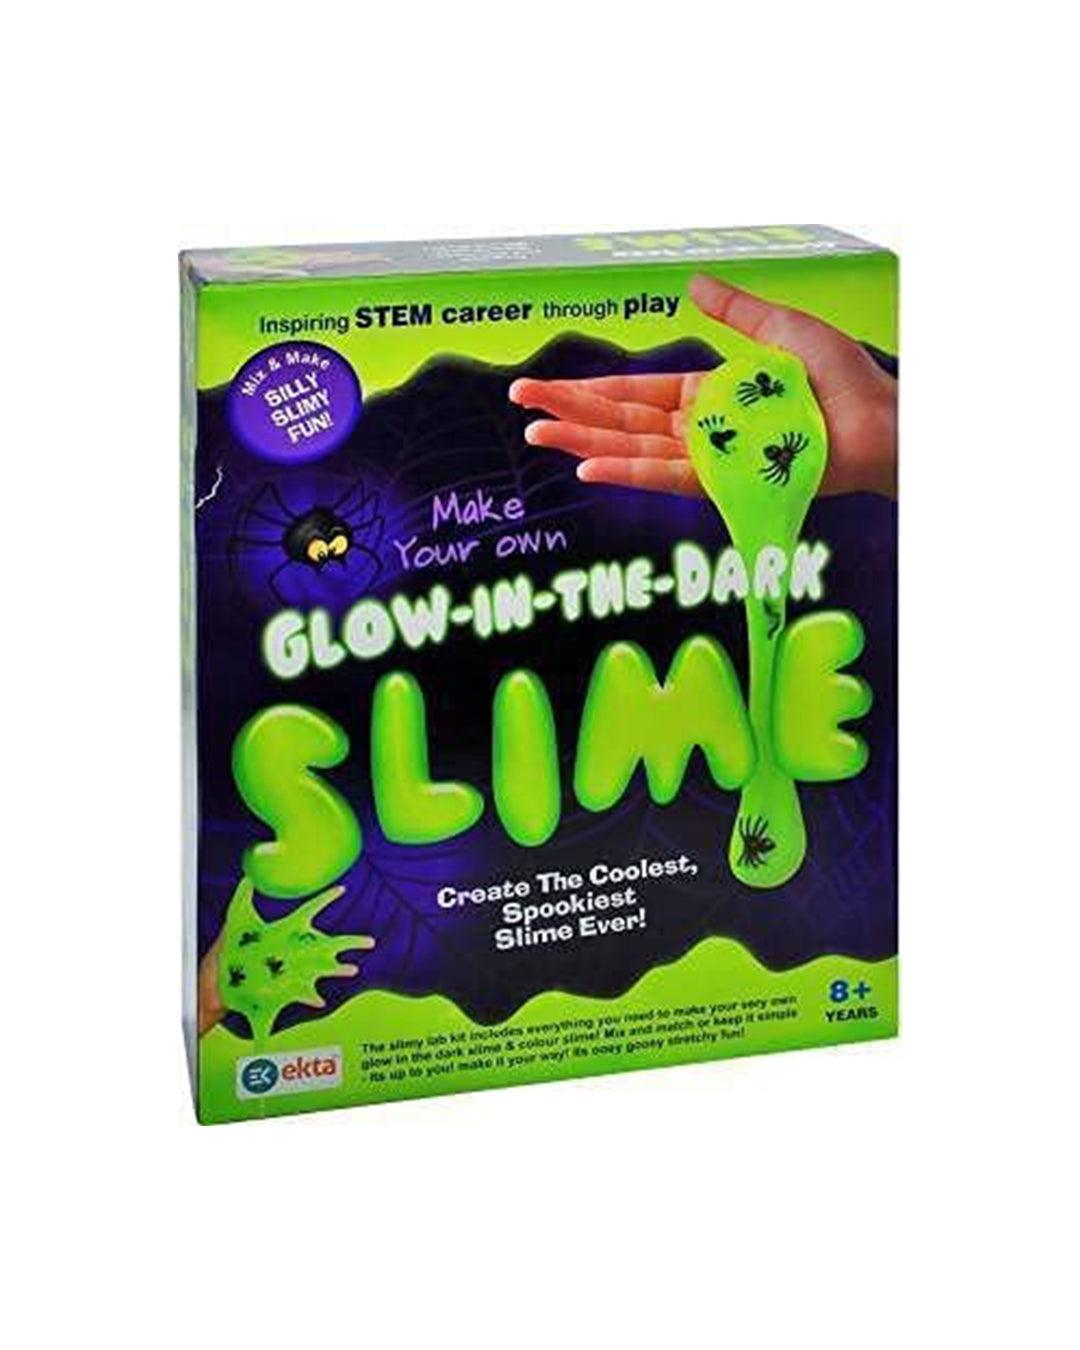 GROW-IN-THE-DARK Slime Lab - For Child Age 8 & Up - MARKET 99